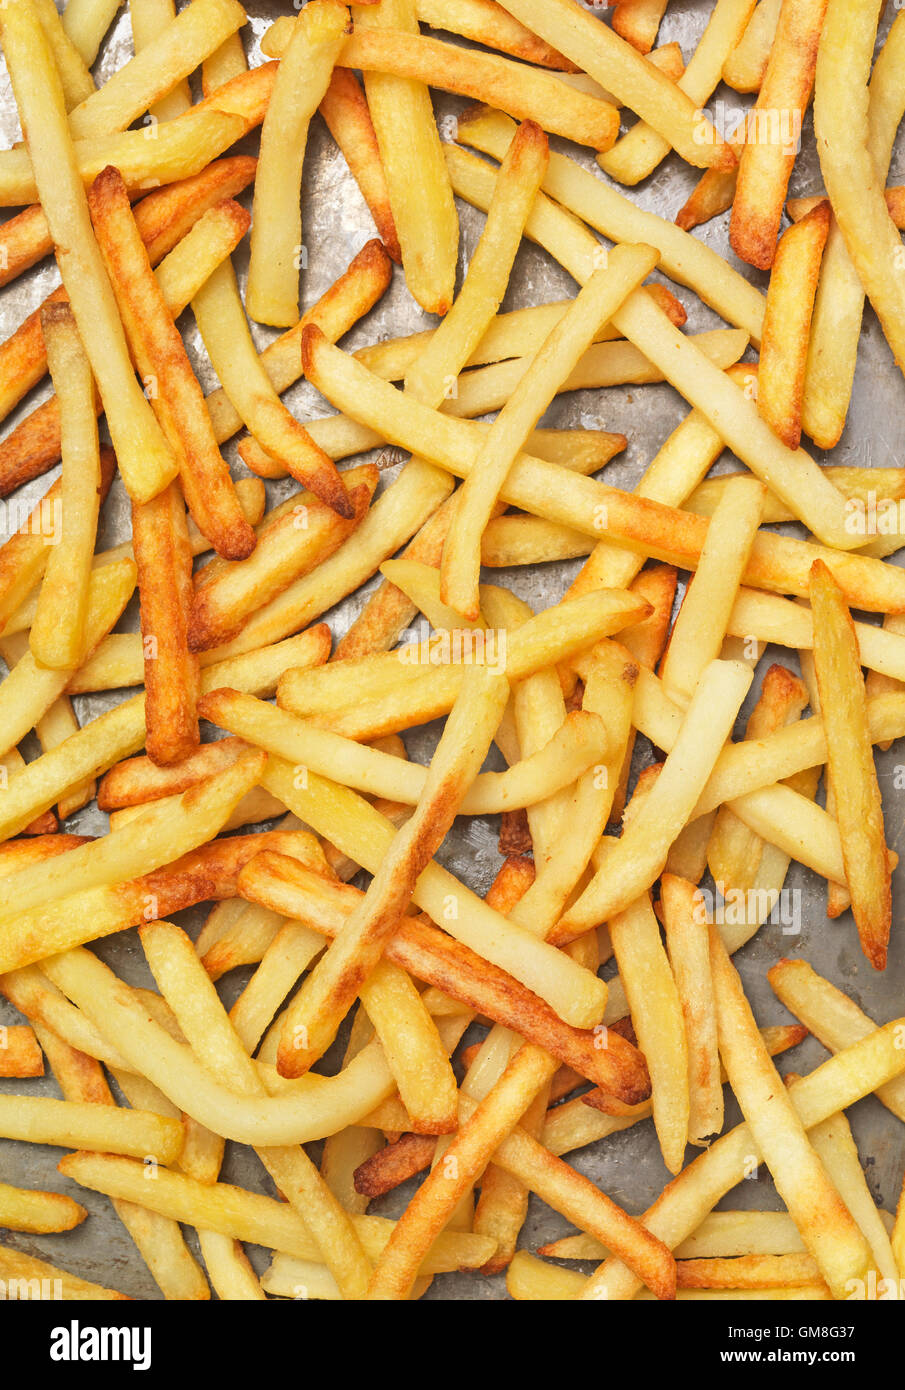 French fries on a baking tray Stock Photo